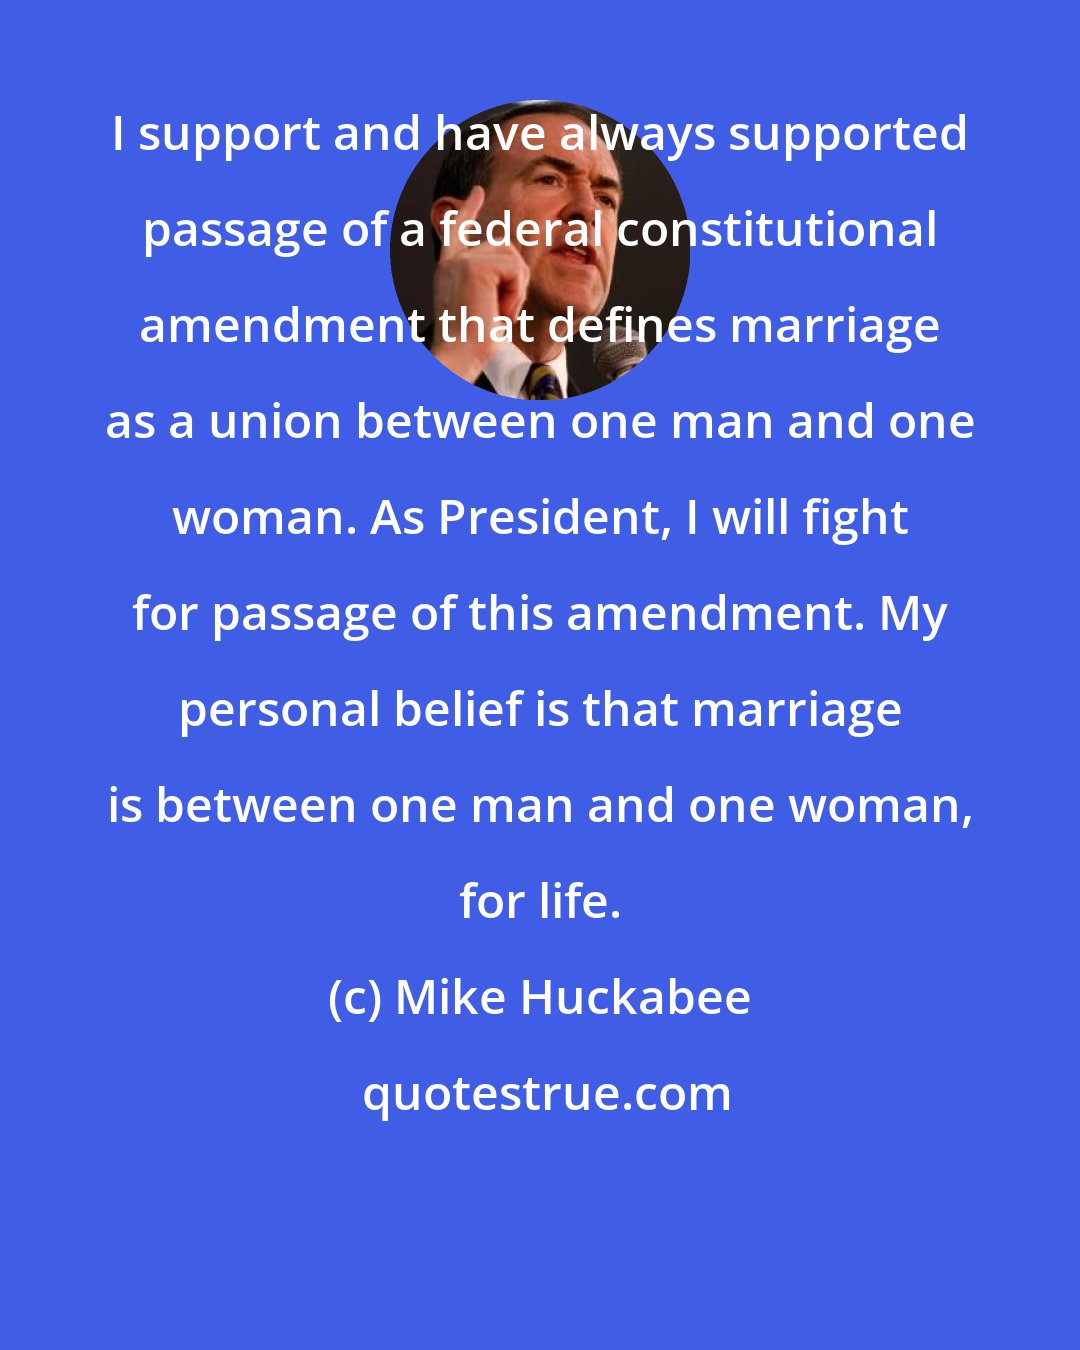 Mike Huckabee: I support and have always supported passage of a federal constitutional amendment that defines marriage as a union between one man and one woman. As President, I will fight for passage of this amendment. My personal belief is that marriage is between one man and one woman, for life.